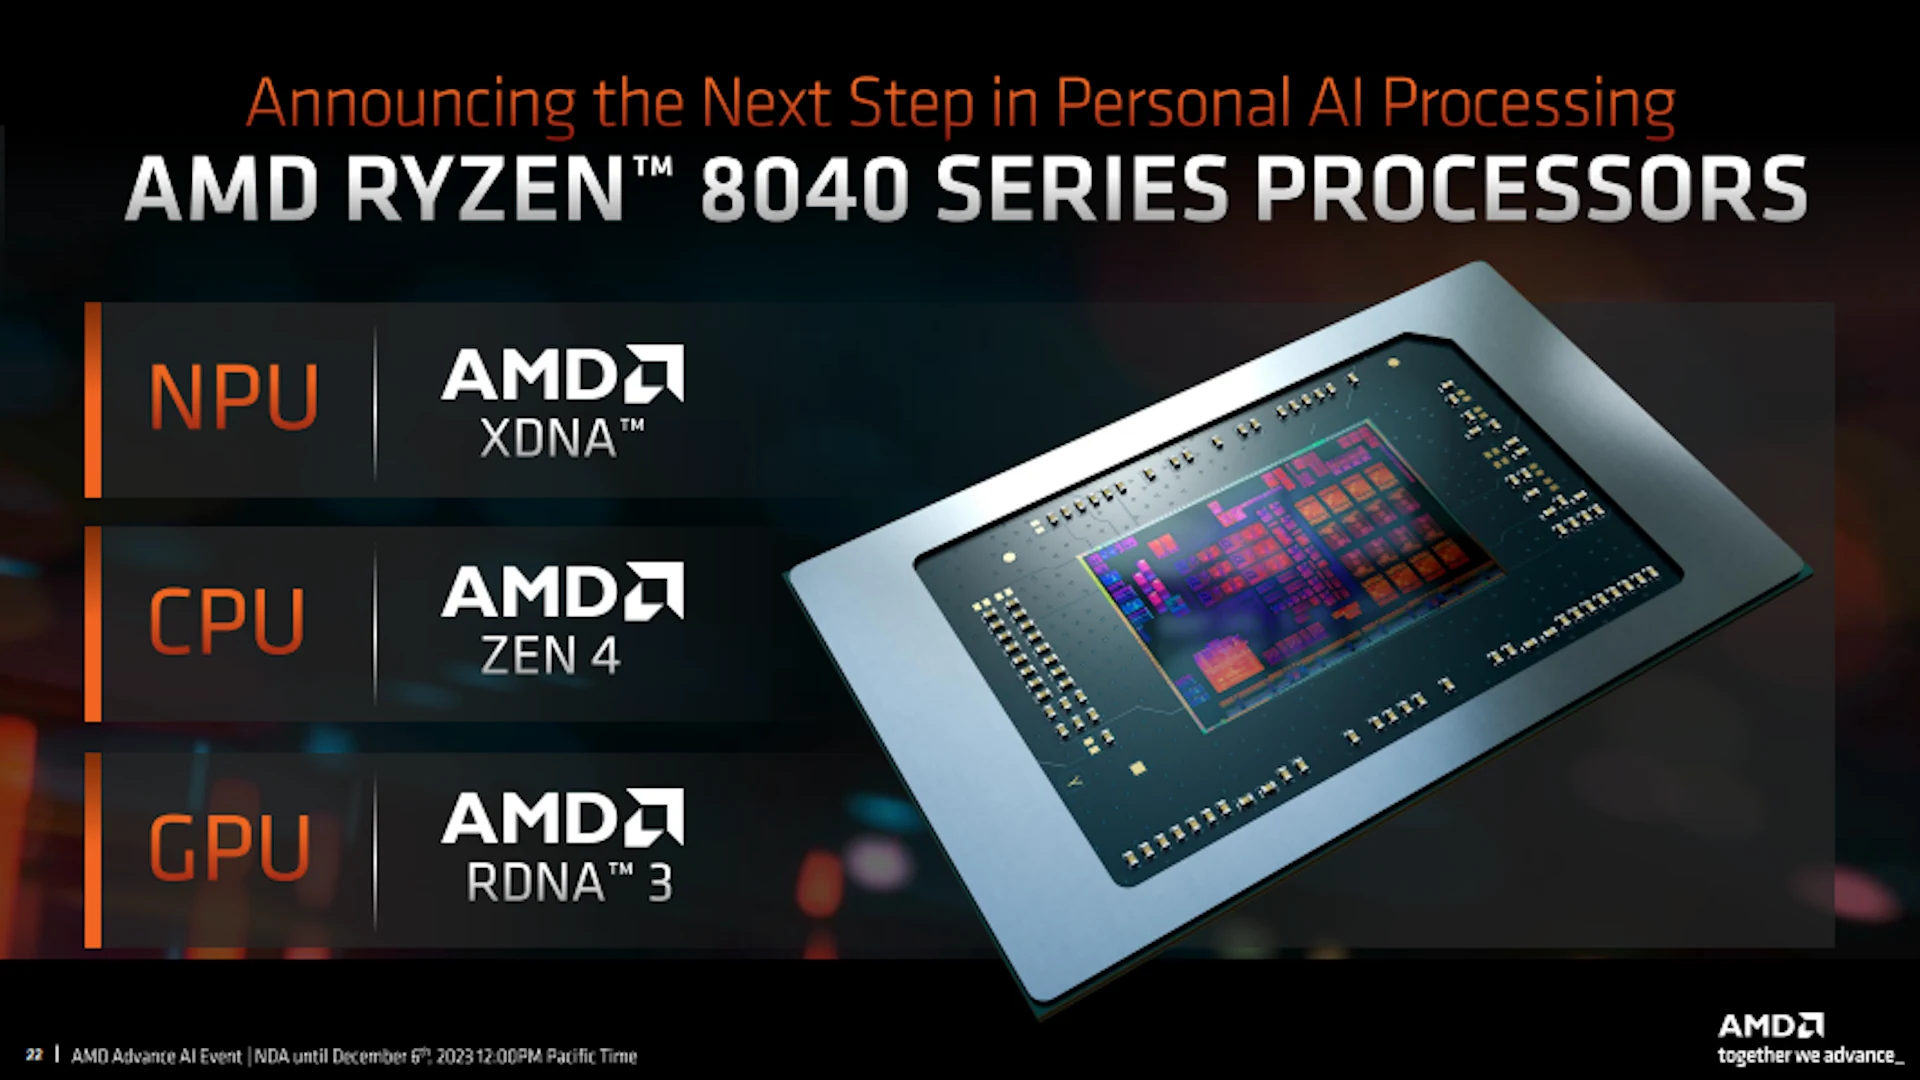 The AMD Ryzen 8040 processor series reinforces the company’s market leadership with Ryzen AI